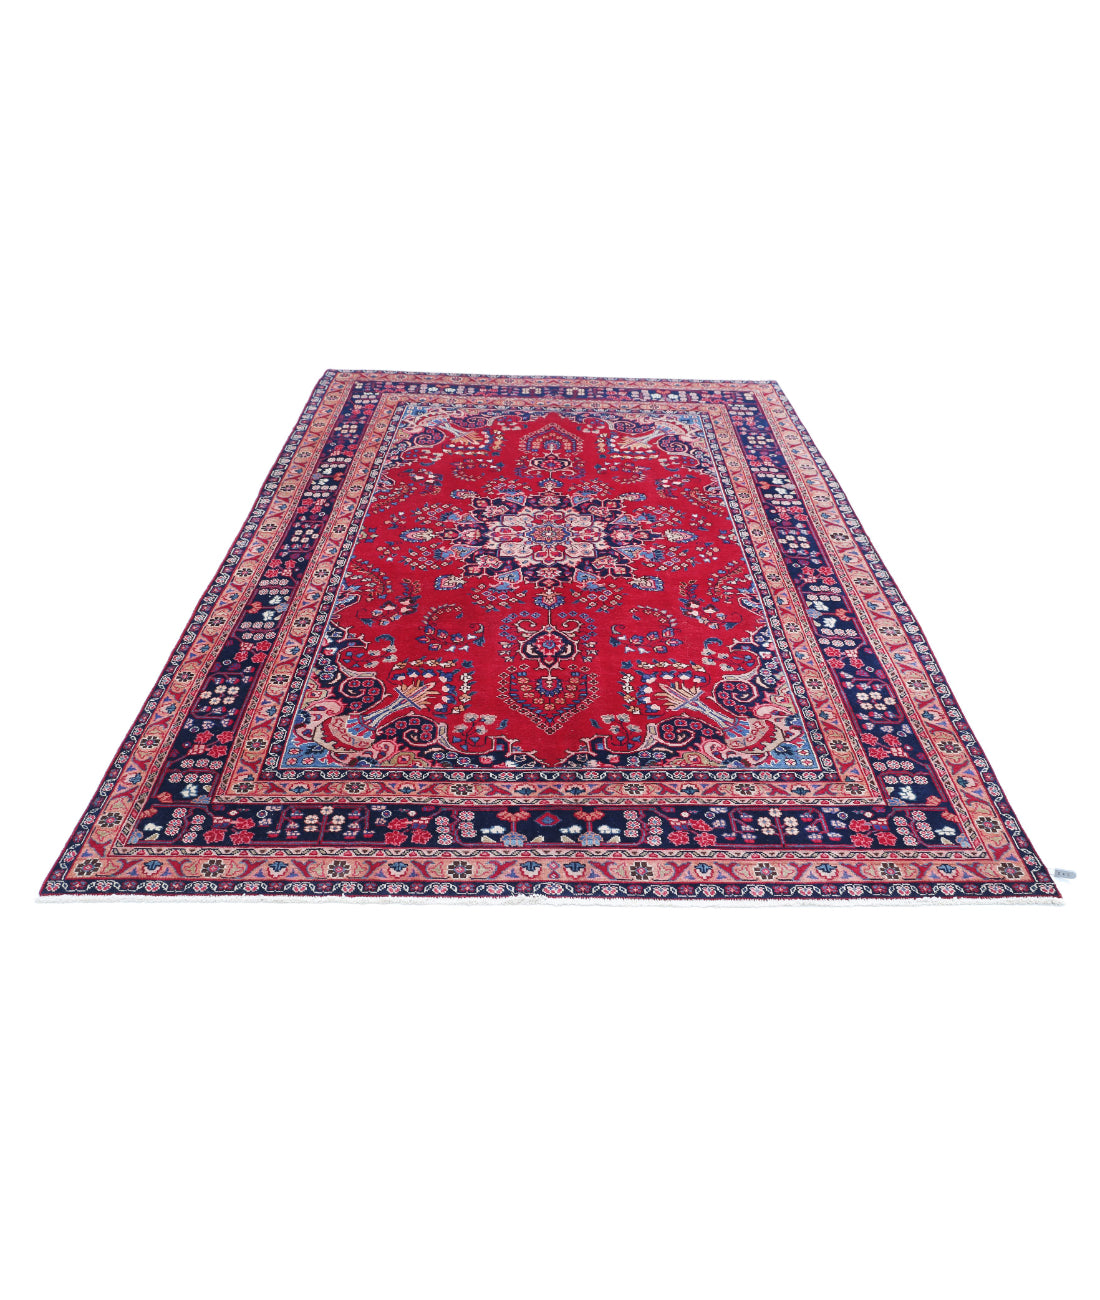 Hand Knotted Persian Mashad Wool Rug - 6'4'' x 9'4'' 6'4'' x 9'4'' (190 X 280) / Red / Blue